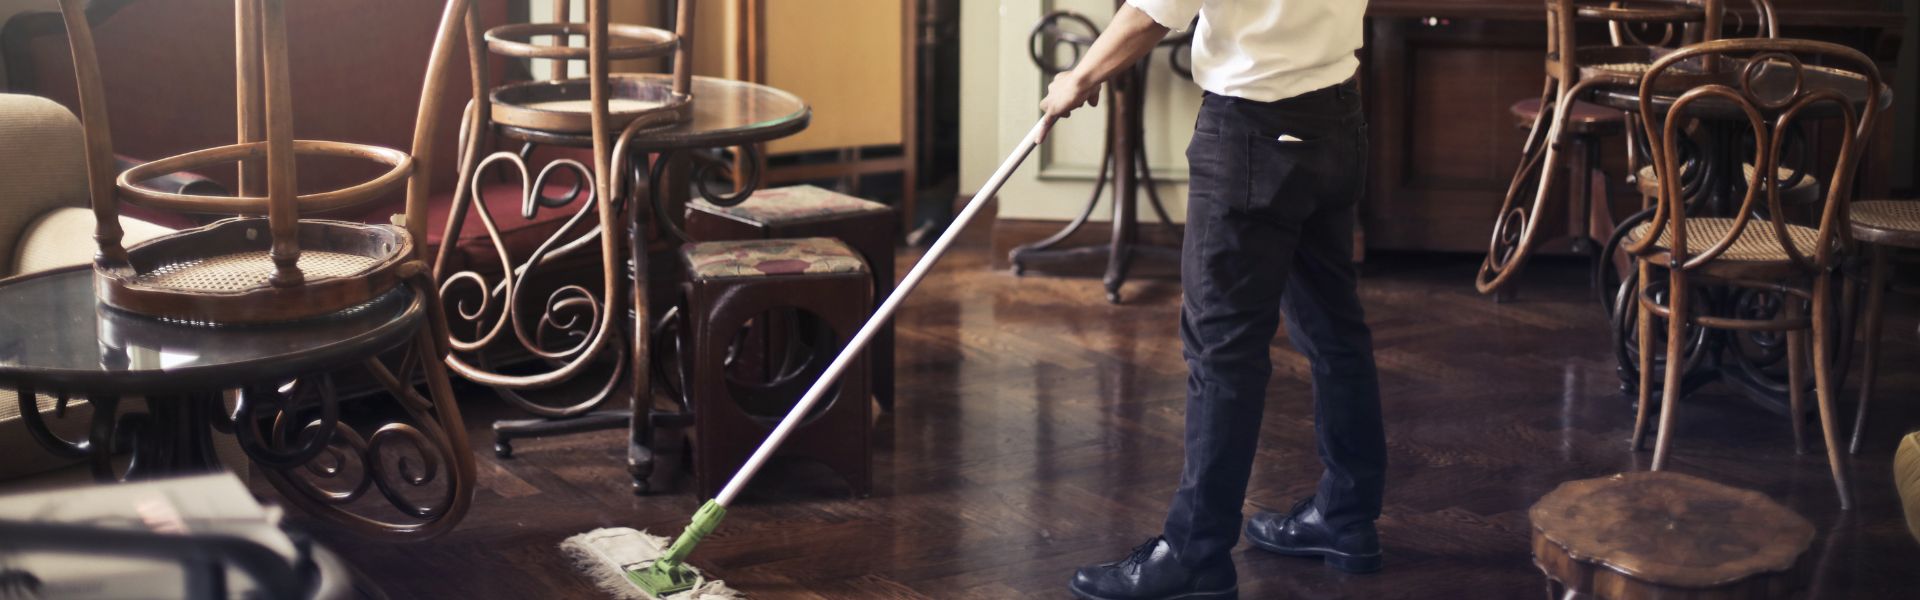 Importance of Restaurant Cleaning